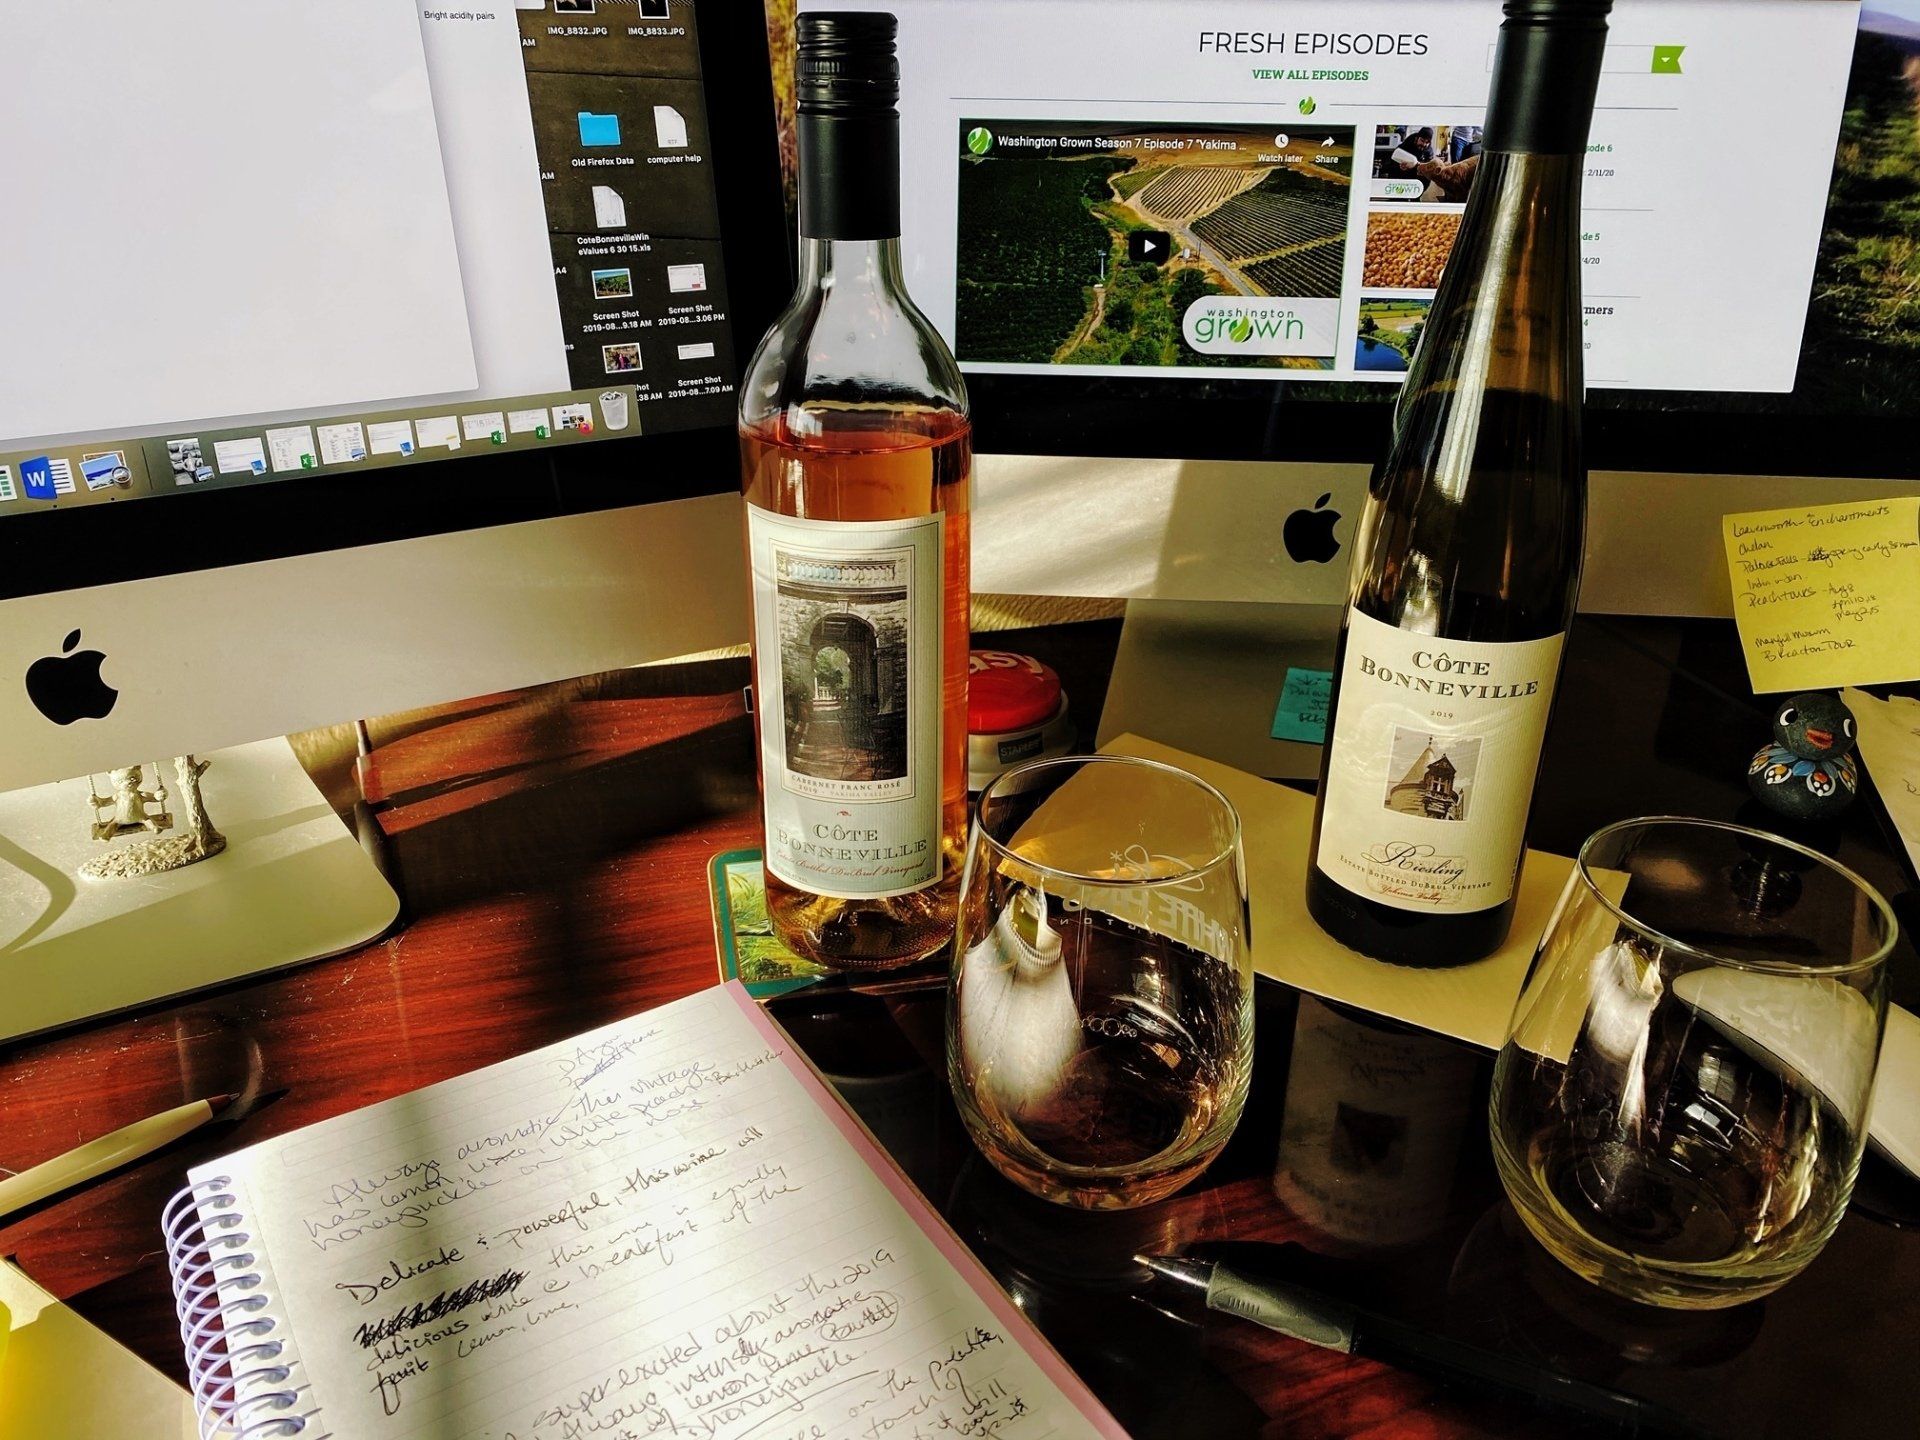 Rosé and Riesling tasting notes being written